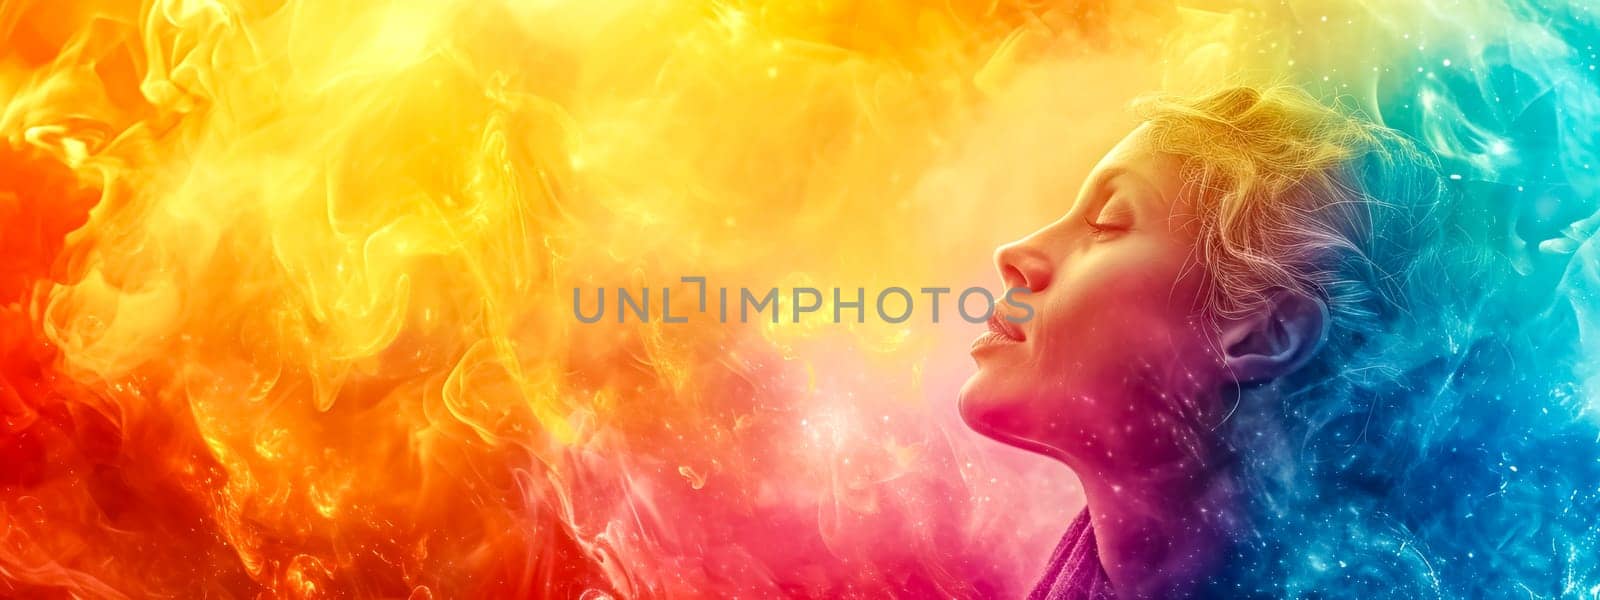 woman's face, serene and contemplative, emerging from a vibrant backdrop of swirling colors that transition from warm oranges to cool blues, inner peace and the spectrum of human emotion. copy space